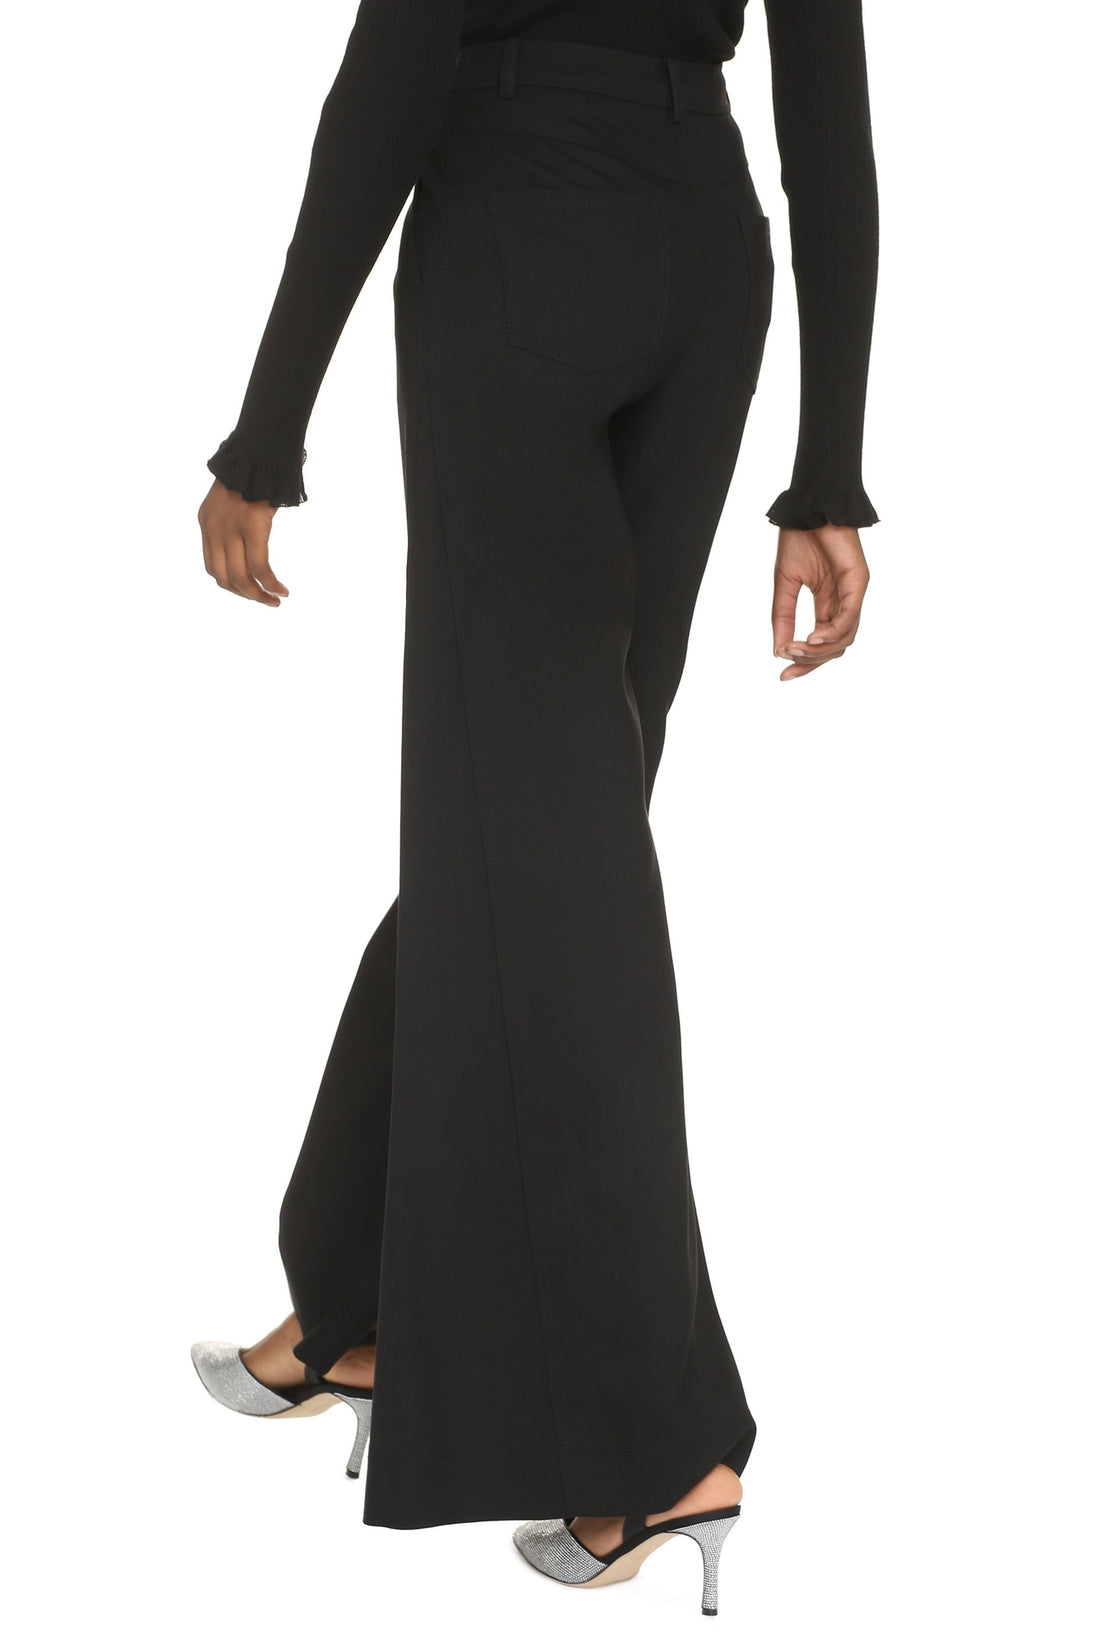 Boutique Moschino-OUTLET-SALE-High-waist wide-leg trousers-ARCHIVIST